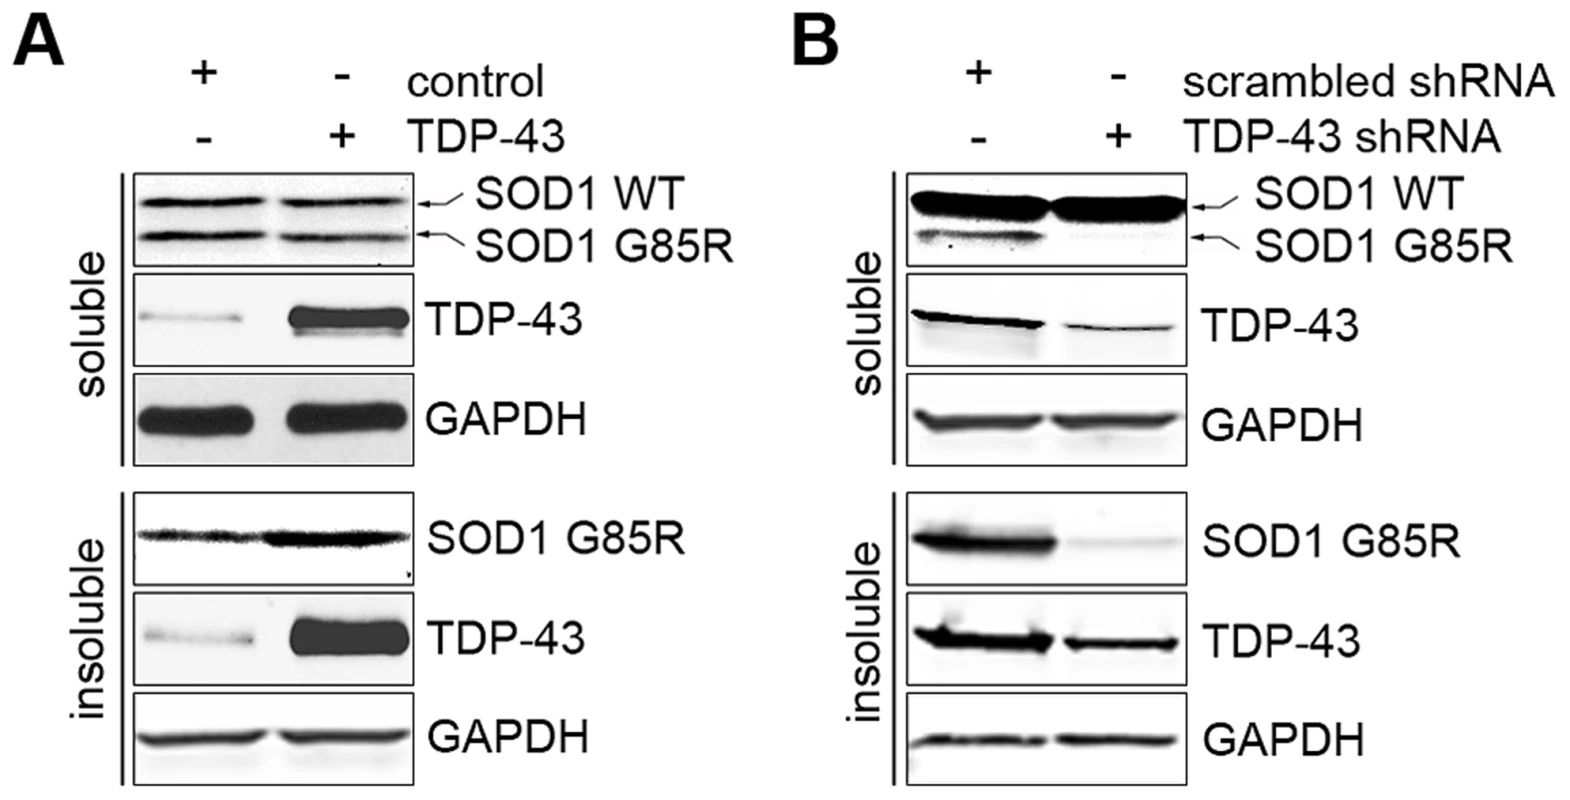 TDP-43 regulates levels of misfolded proteins.